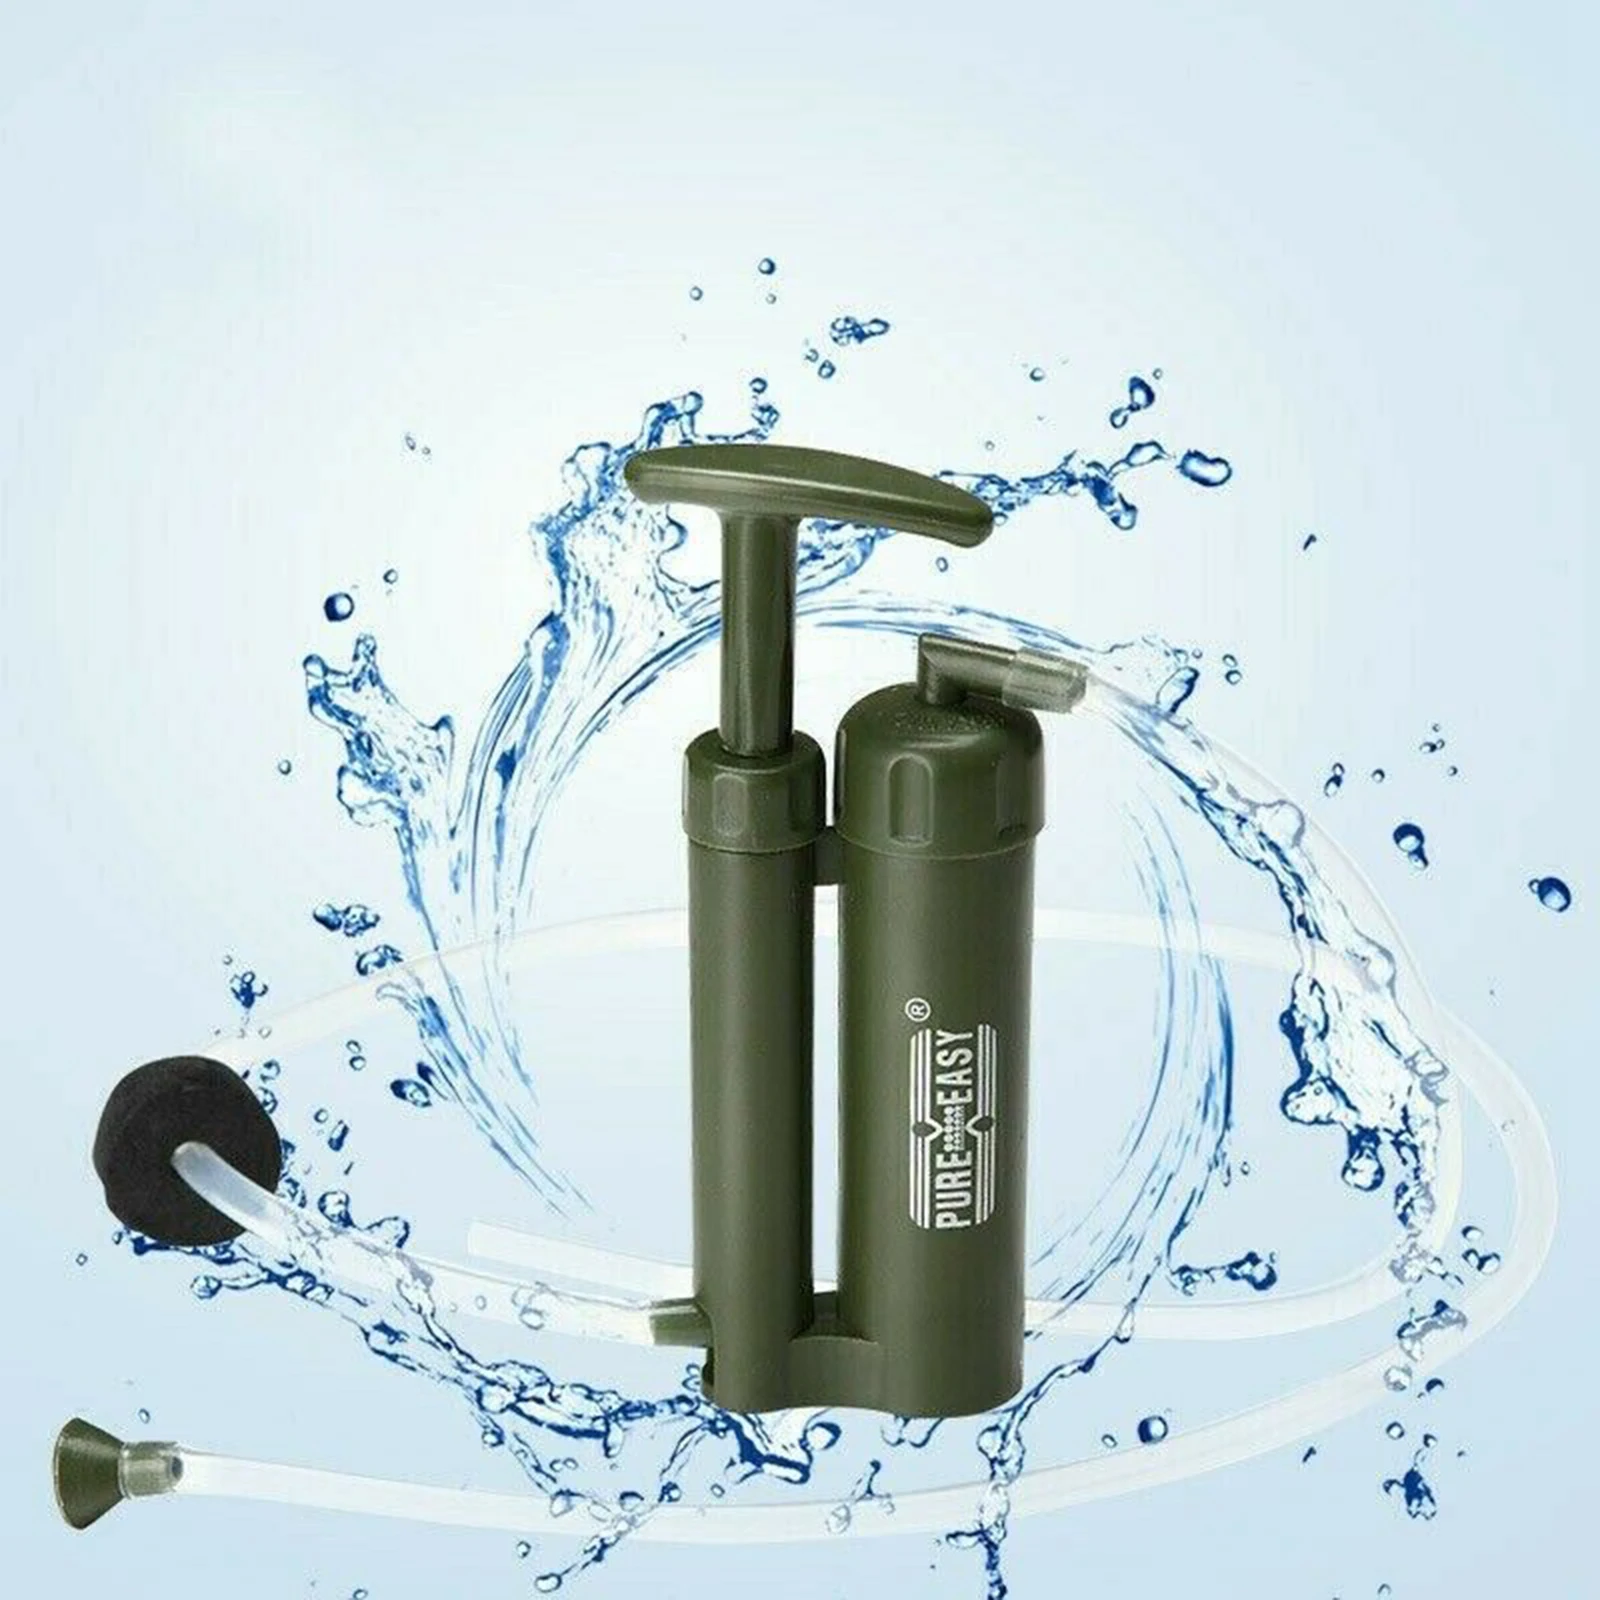 Water Filter Pump|Straw Portable Personal Emergency Filtration Purifier 0.1μm 